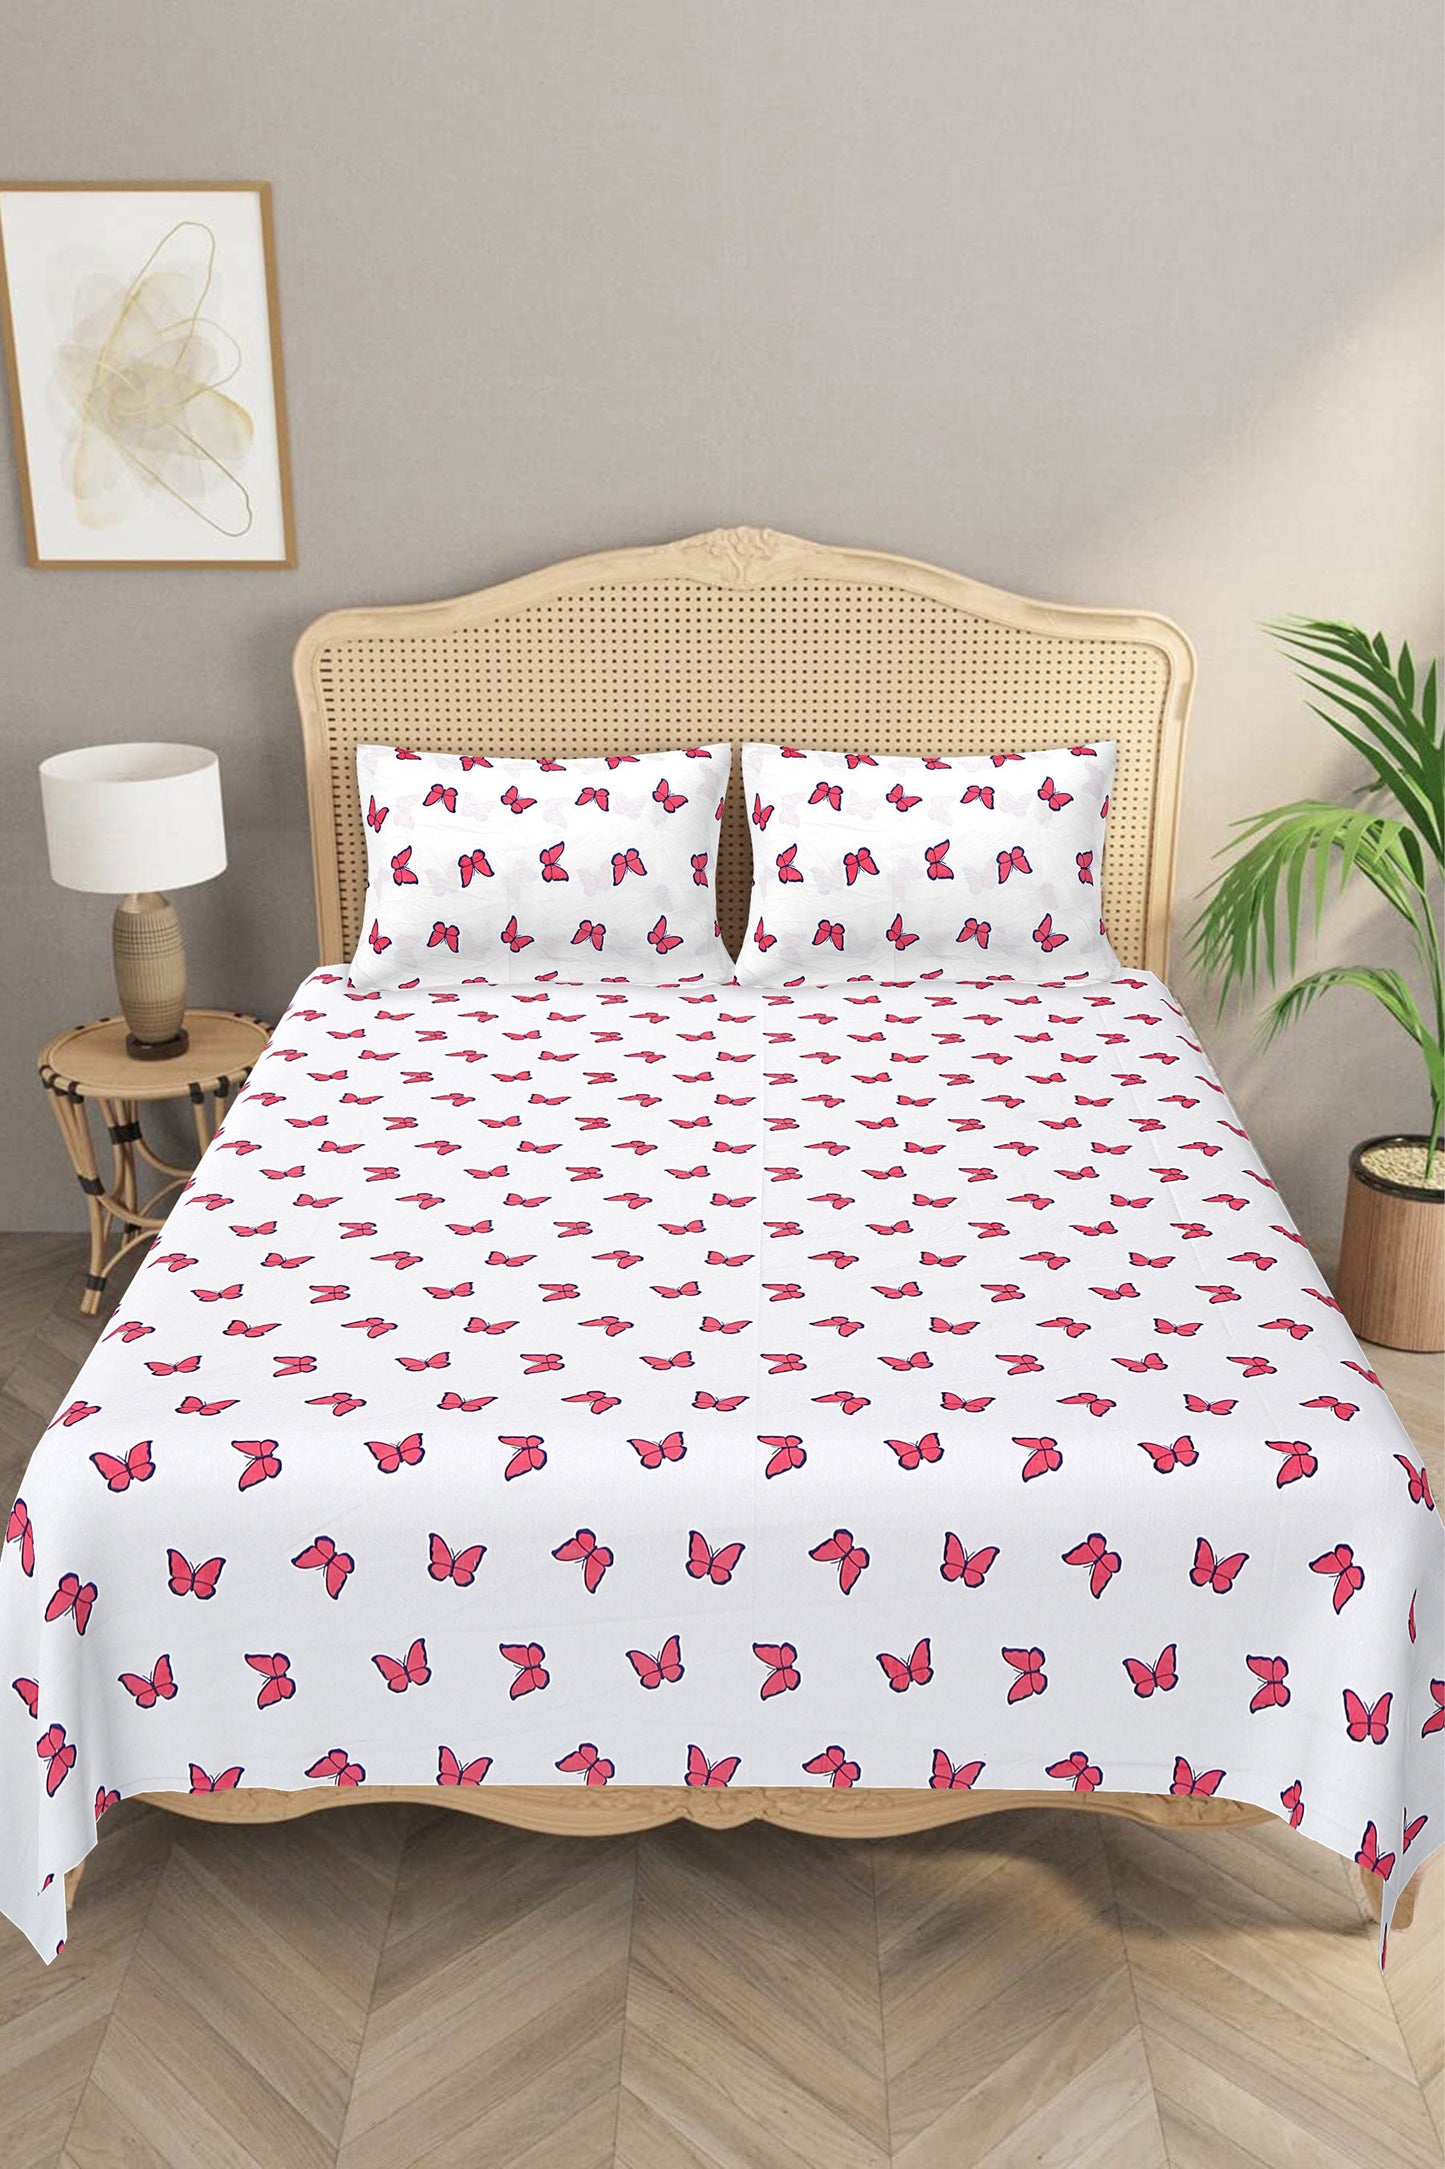 Kids Cotton Bedroom Linens - Double Sheet with 2 Pillow Covers in Red Butterfly Print - King Size Bed